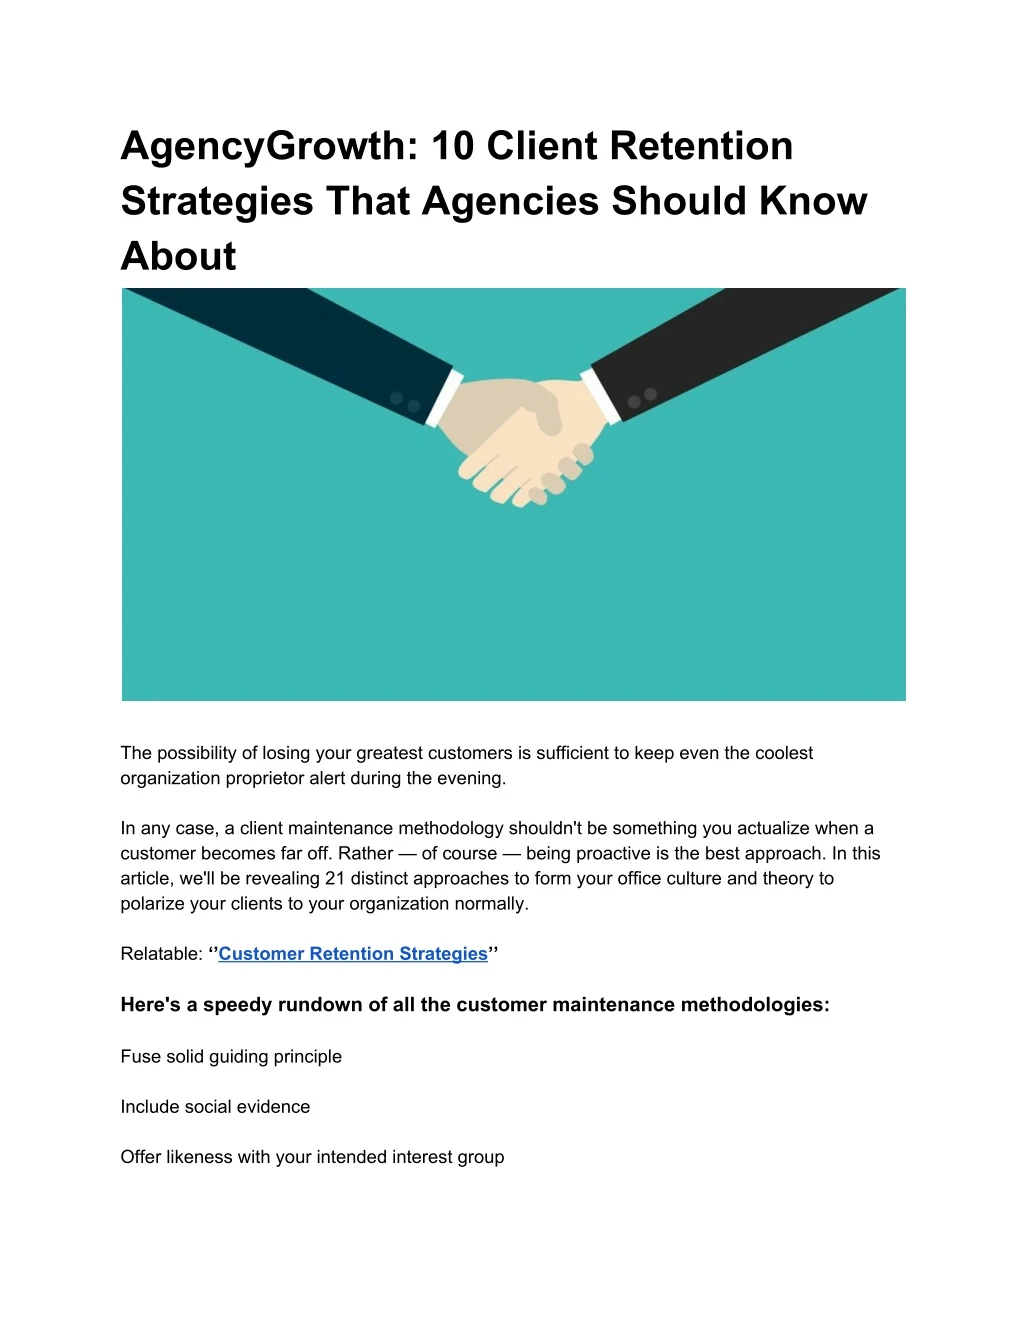 agencygrowth 10 client retention strategies that